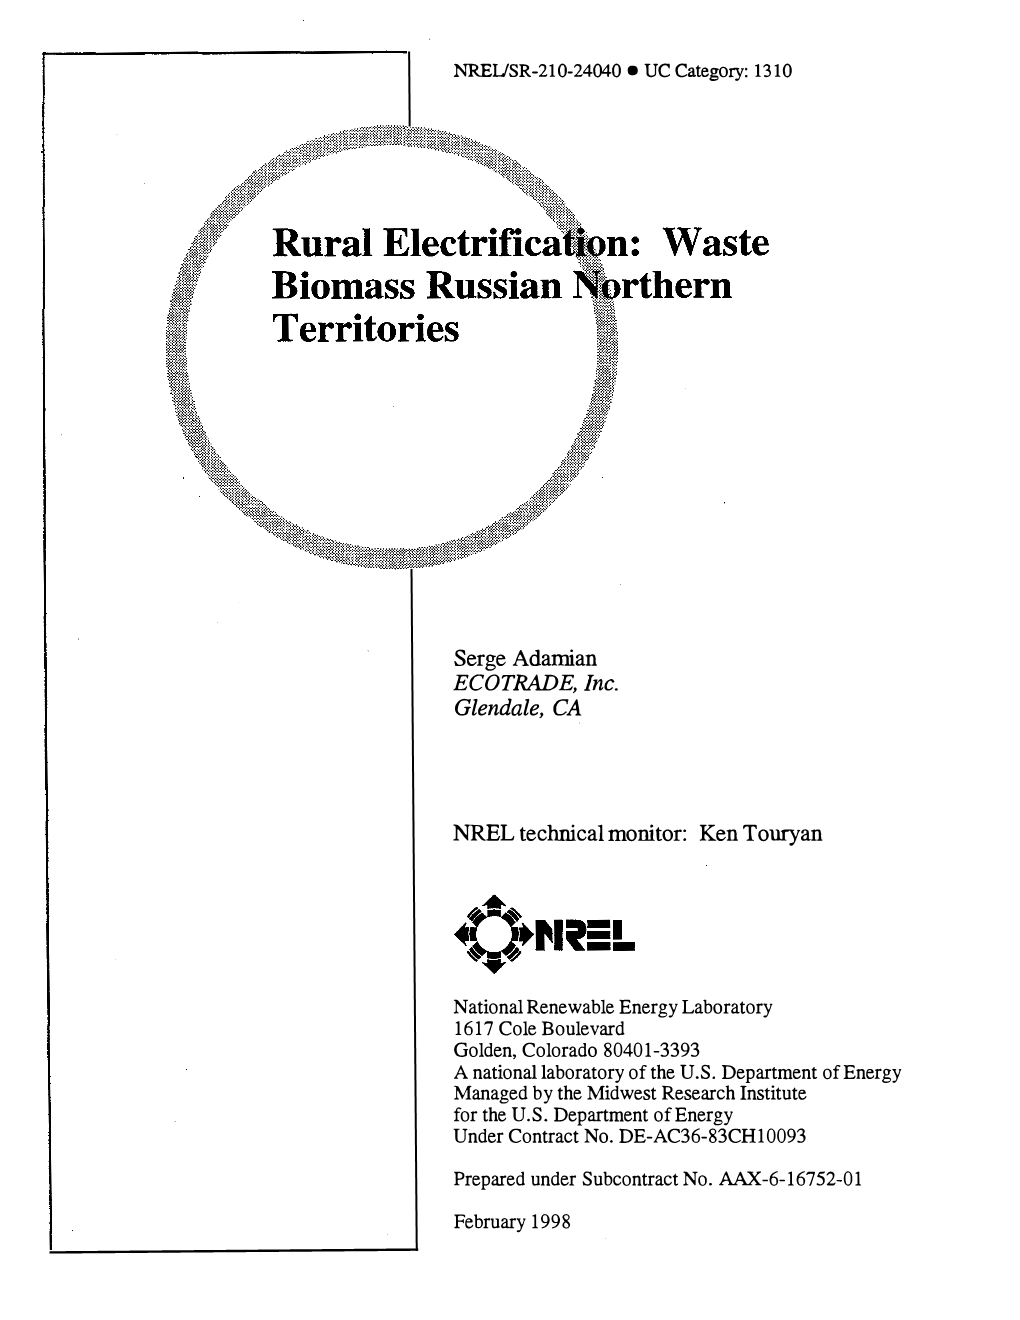 RURAL ELECTRIFICATION: WASTE BIOMASS RUSSIAN NORTHERN TERRITORIES R PREPARED BY: L ECOTRADE, INC